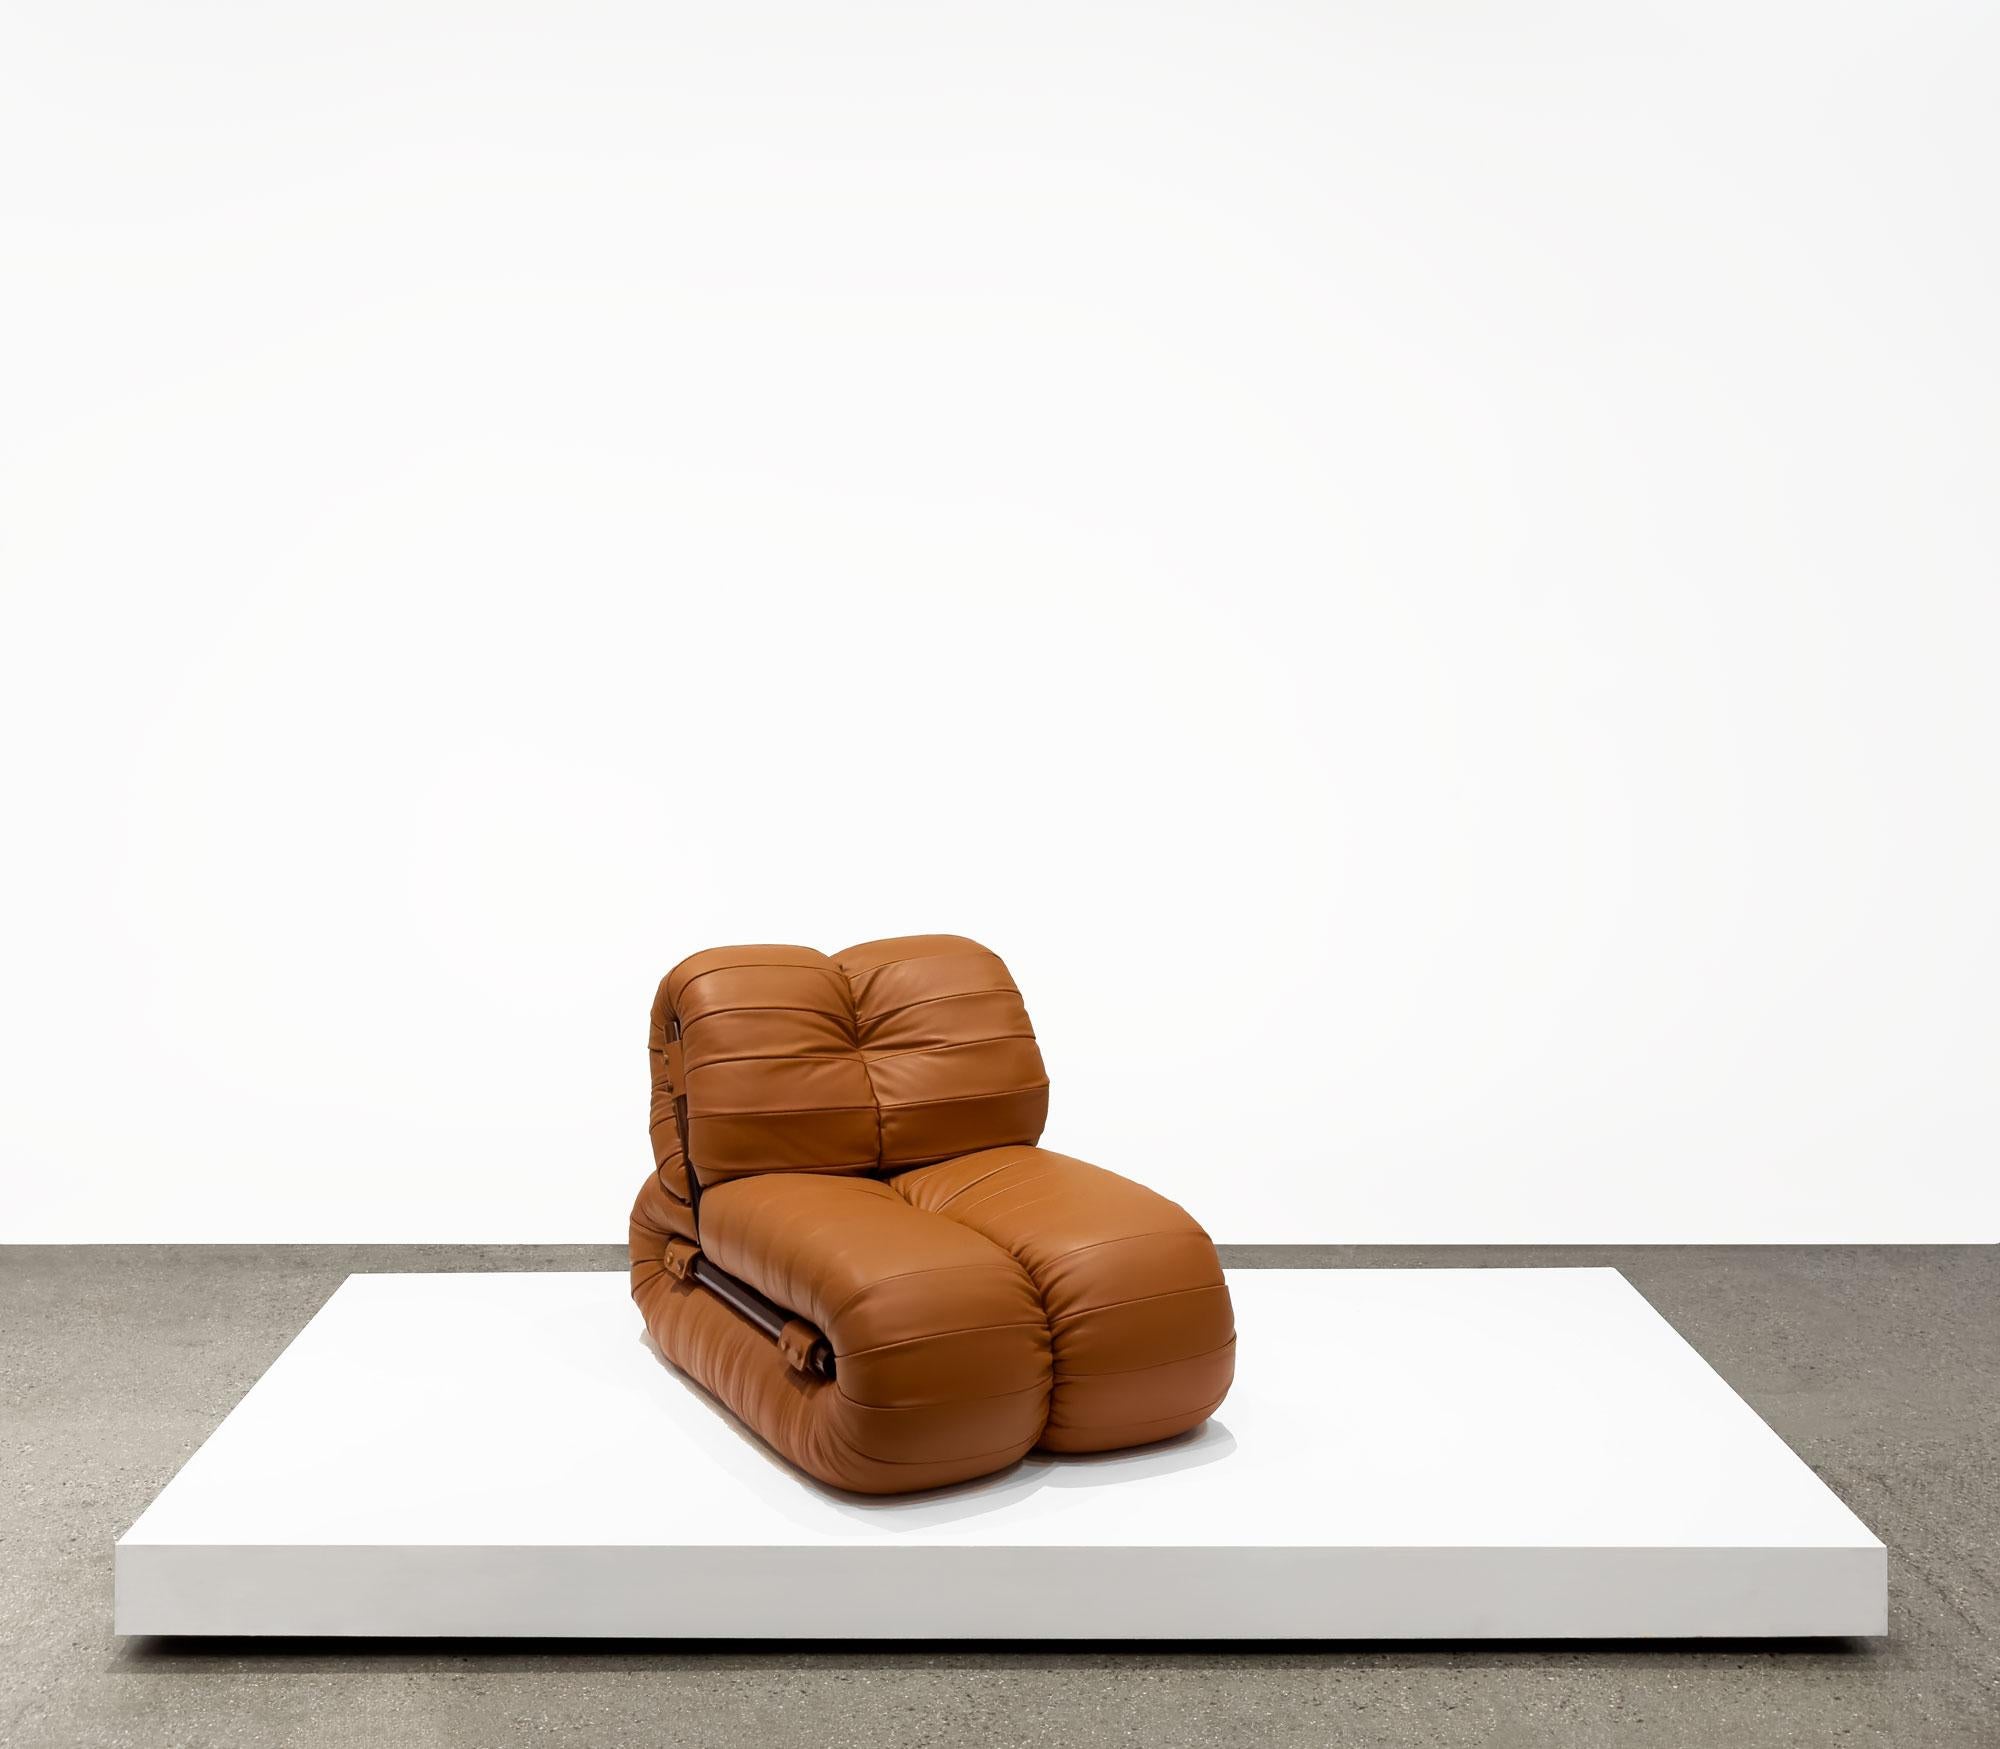 Percival Lafer
Lounge Chair for Brazil Industries
circa 1970s
Edelman Leather, Brazillian Rosewood
28 3/4 x 40 x 28 3/4 inches.